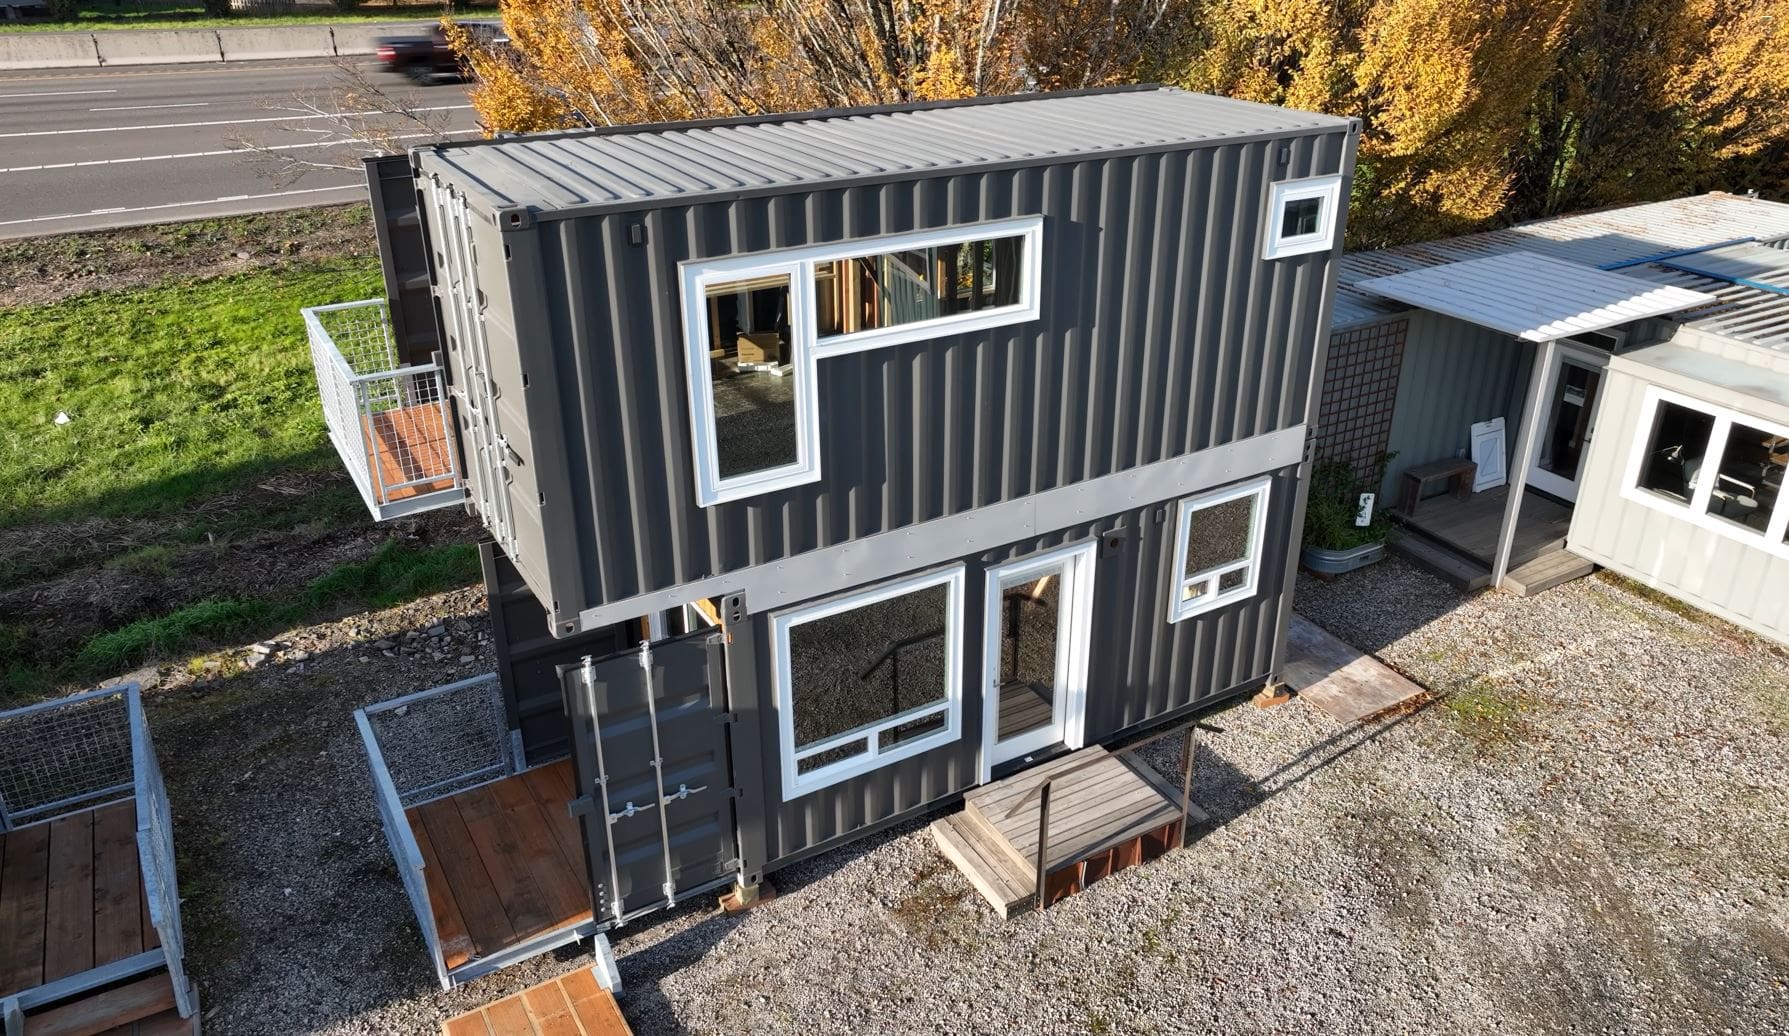 Two-story Container Home